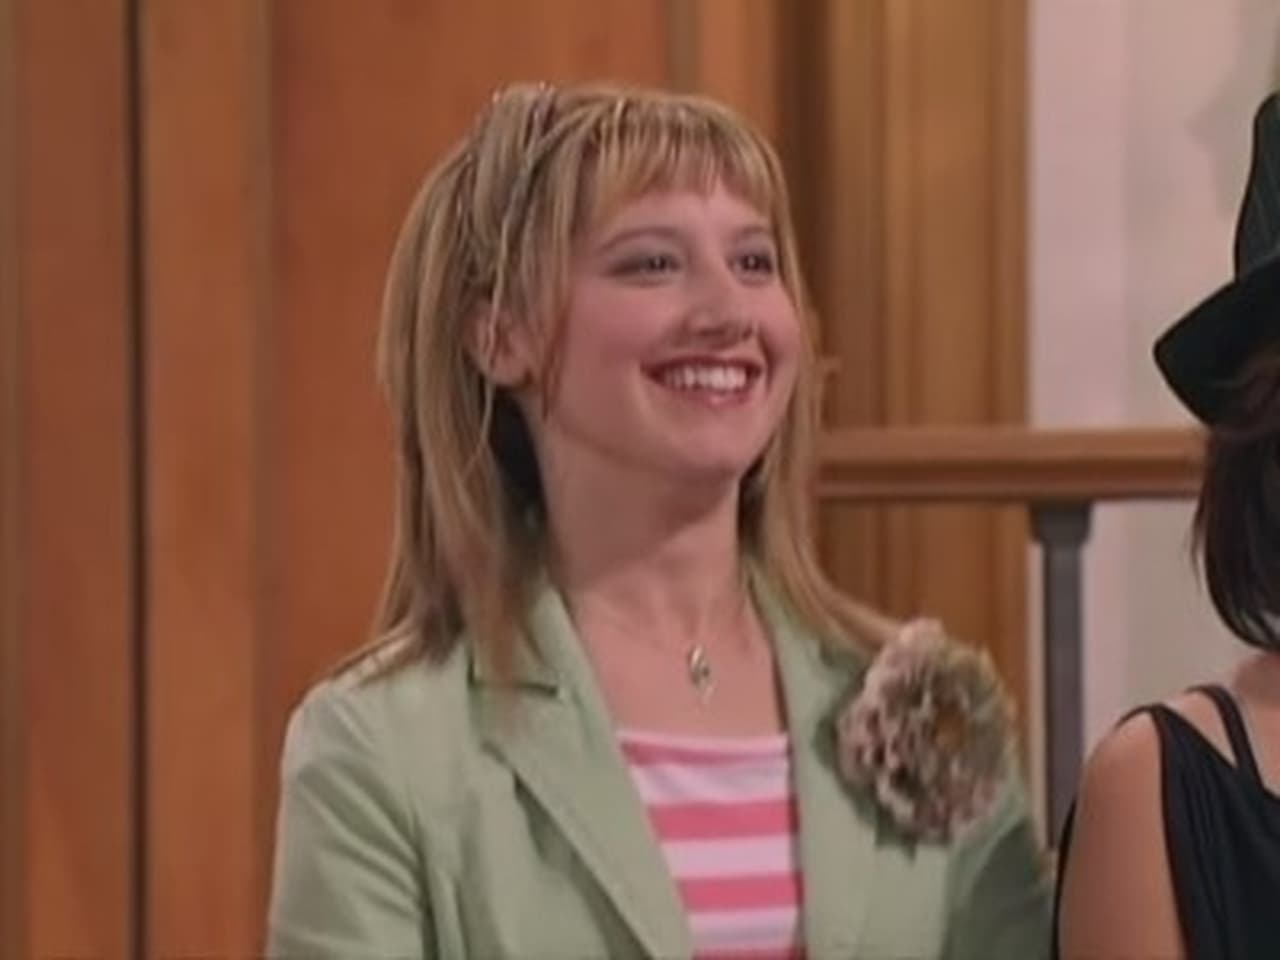 The Suite Life of Zack & Cody - Season 1 Episode 3 : Maddie Checks In